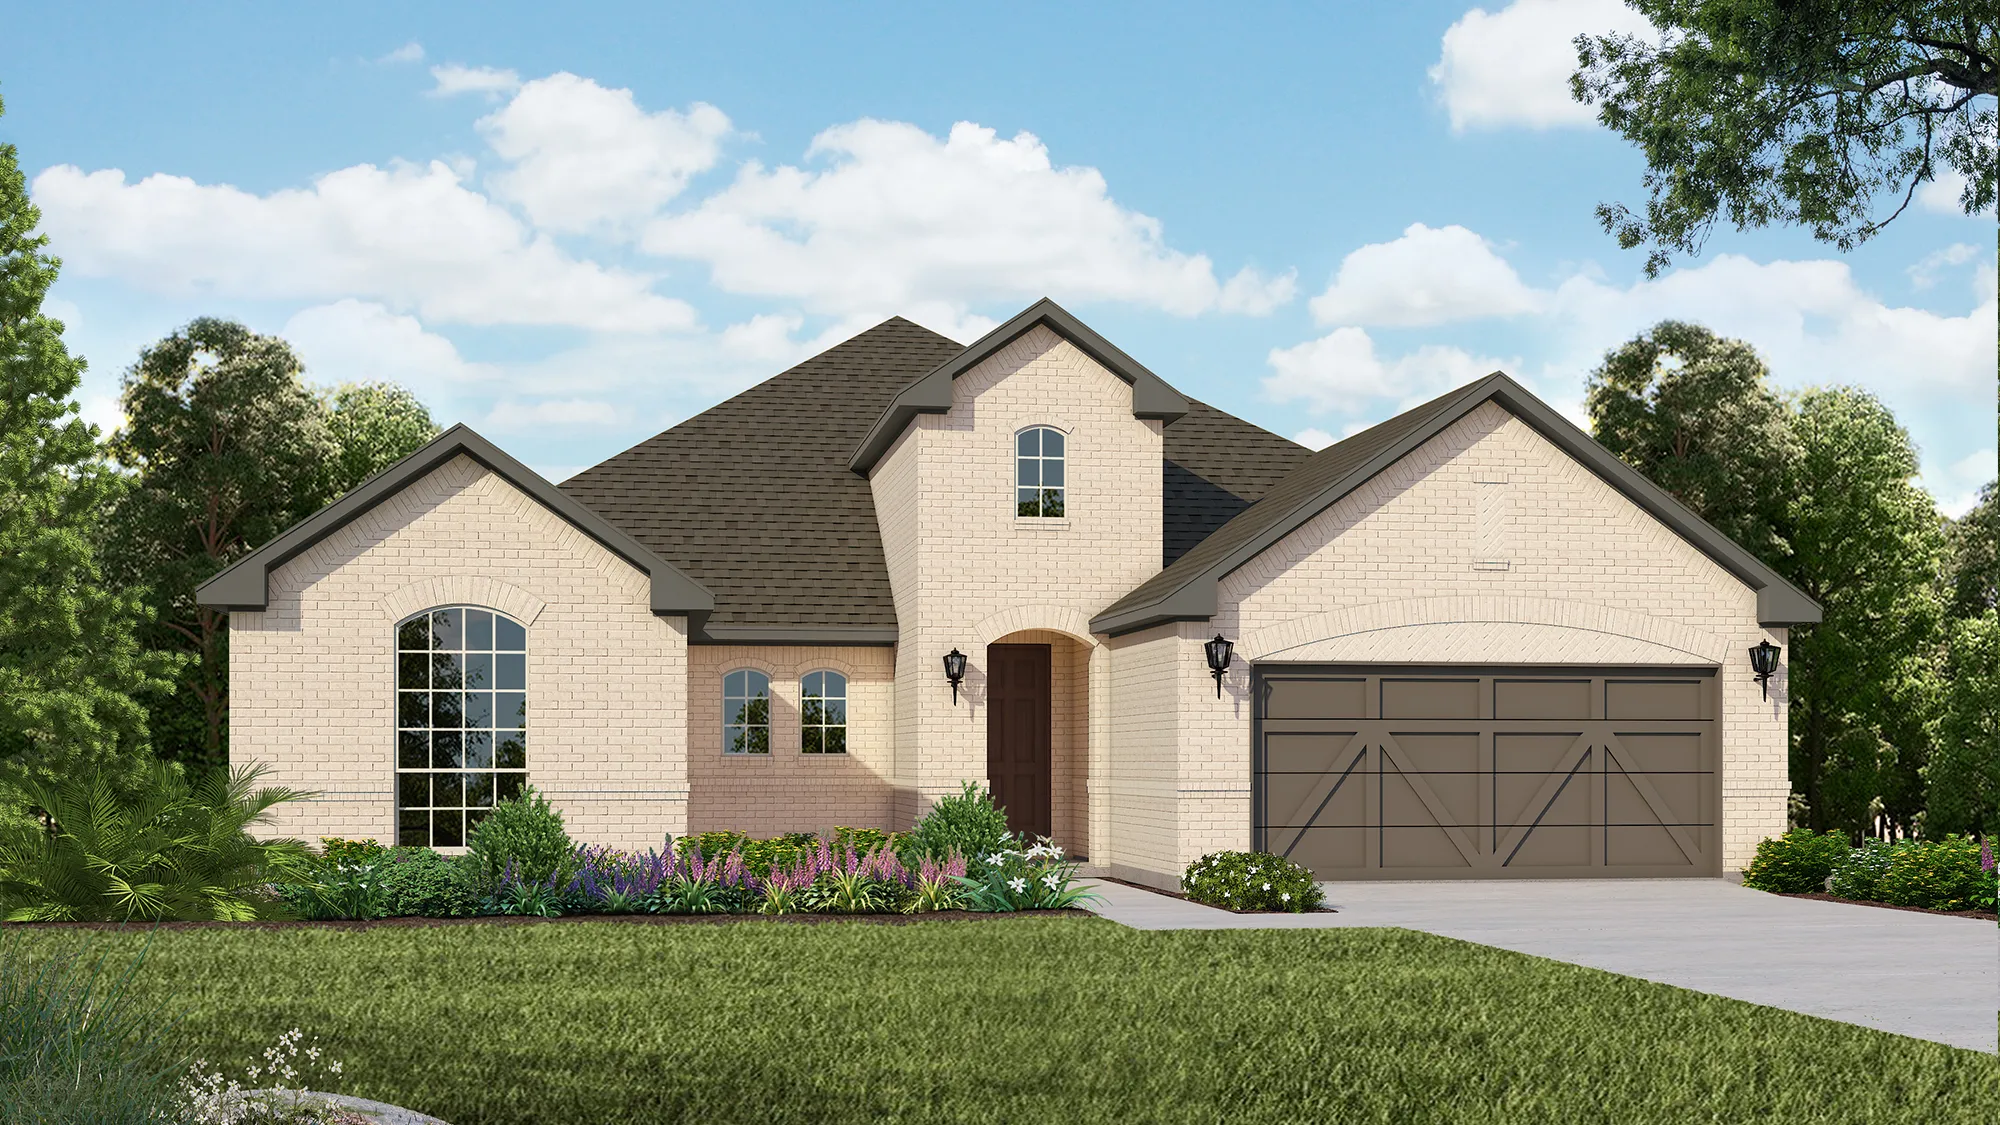 Plan 1690 Elevation A by American Legend Homes